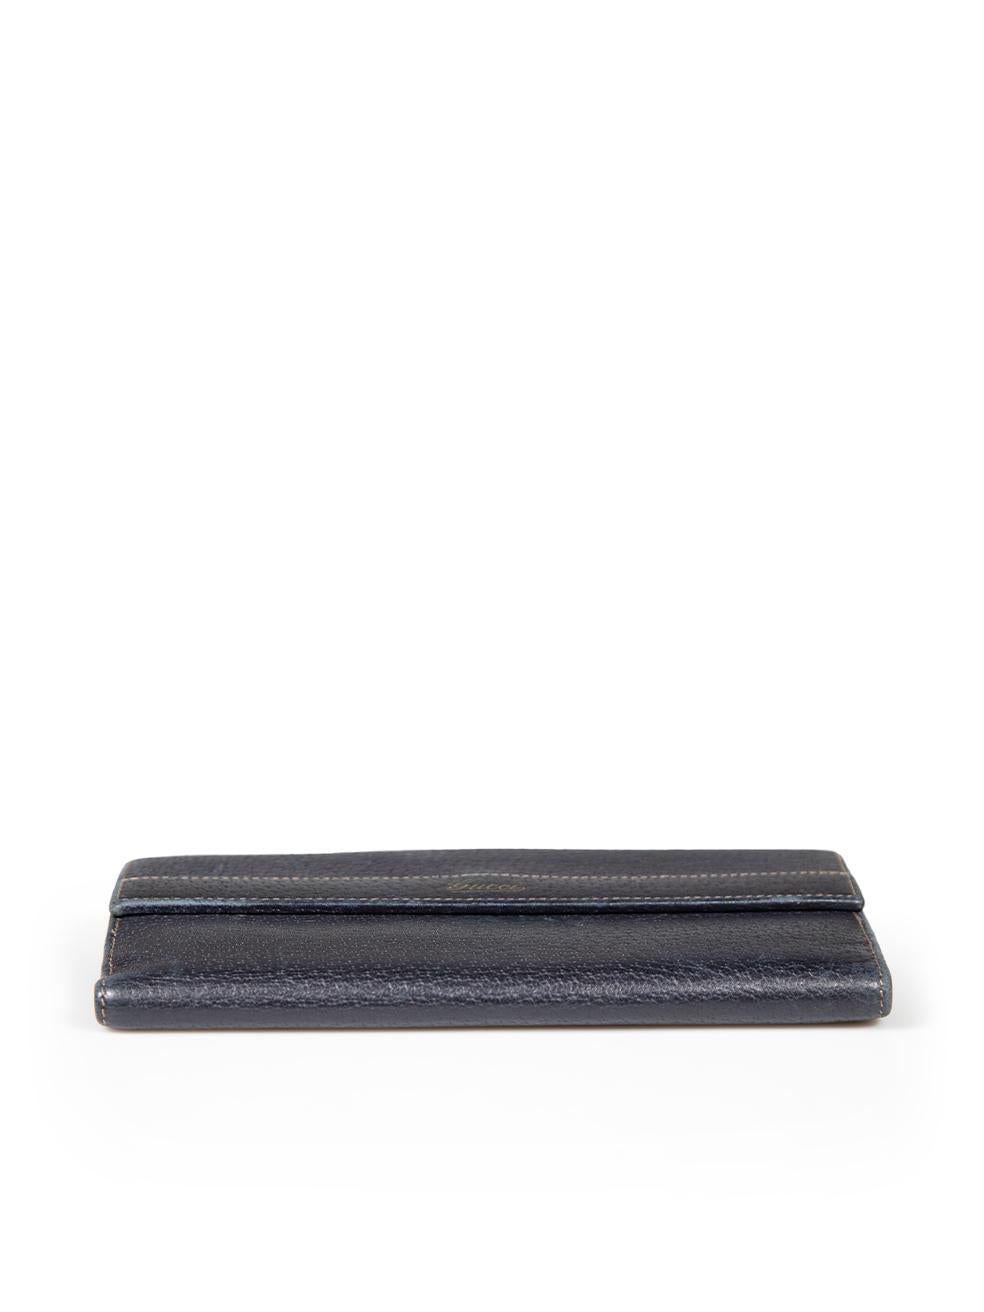 Women's Gucci Navy Leather Long Wallet For Sale